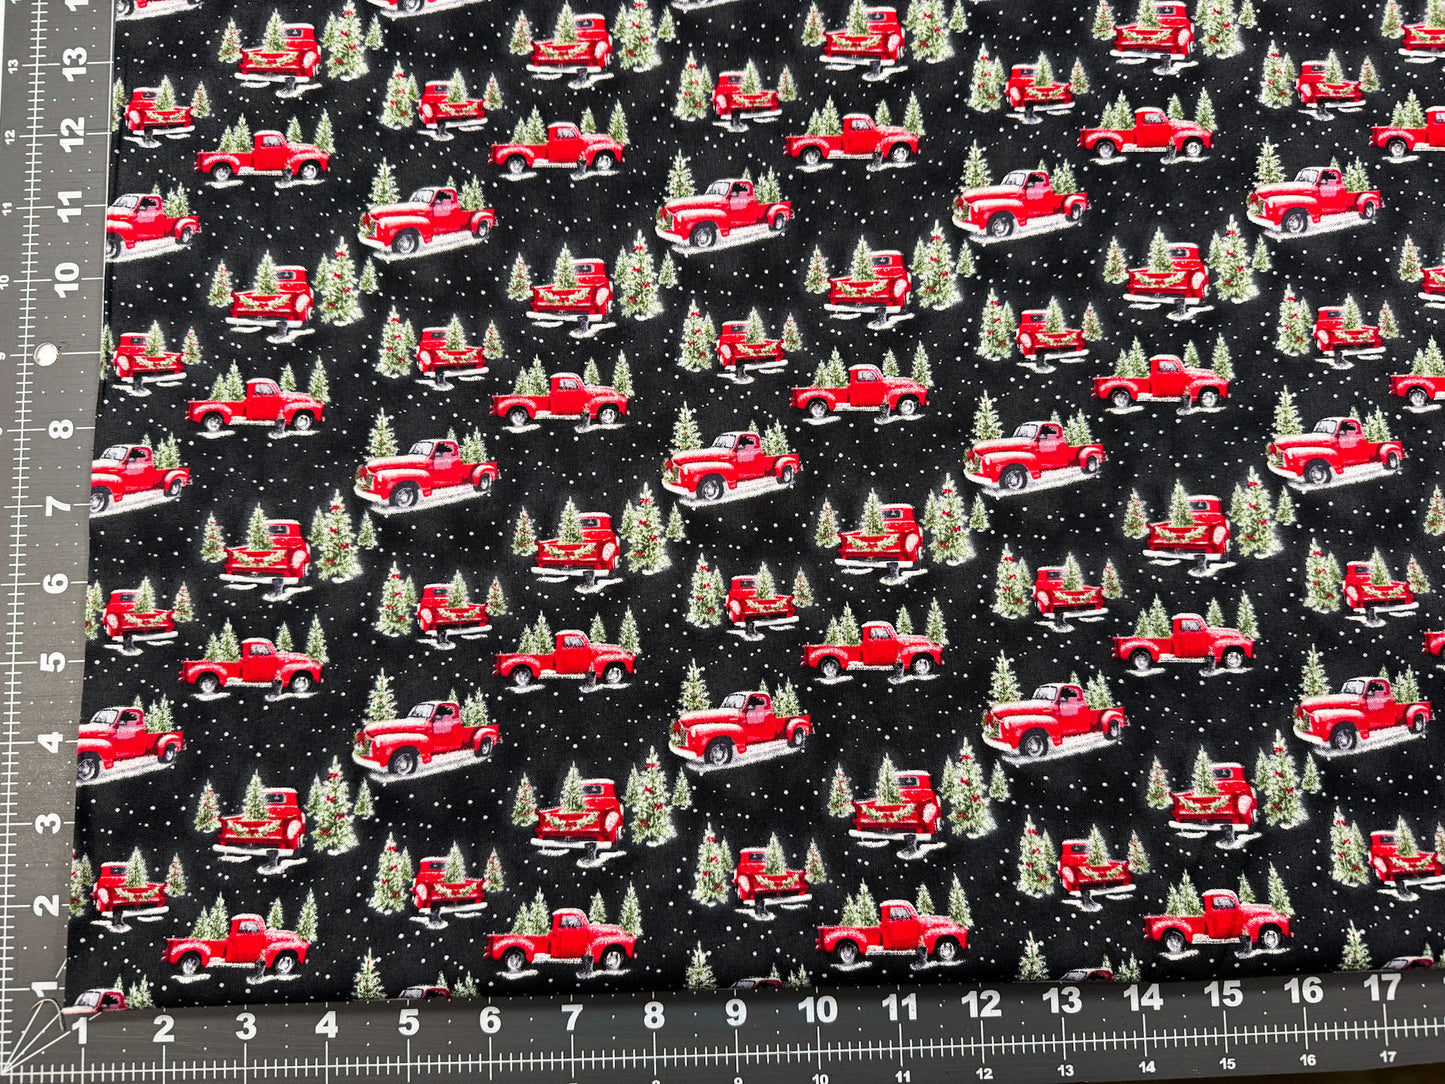 Red Truck Christmas fabric Christmas trees and vintage truck